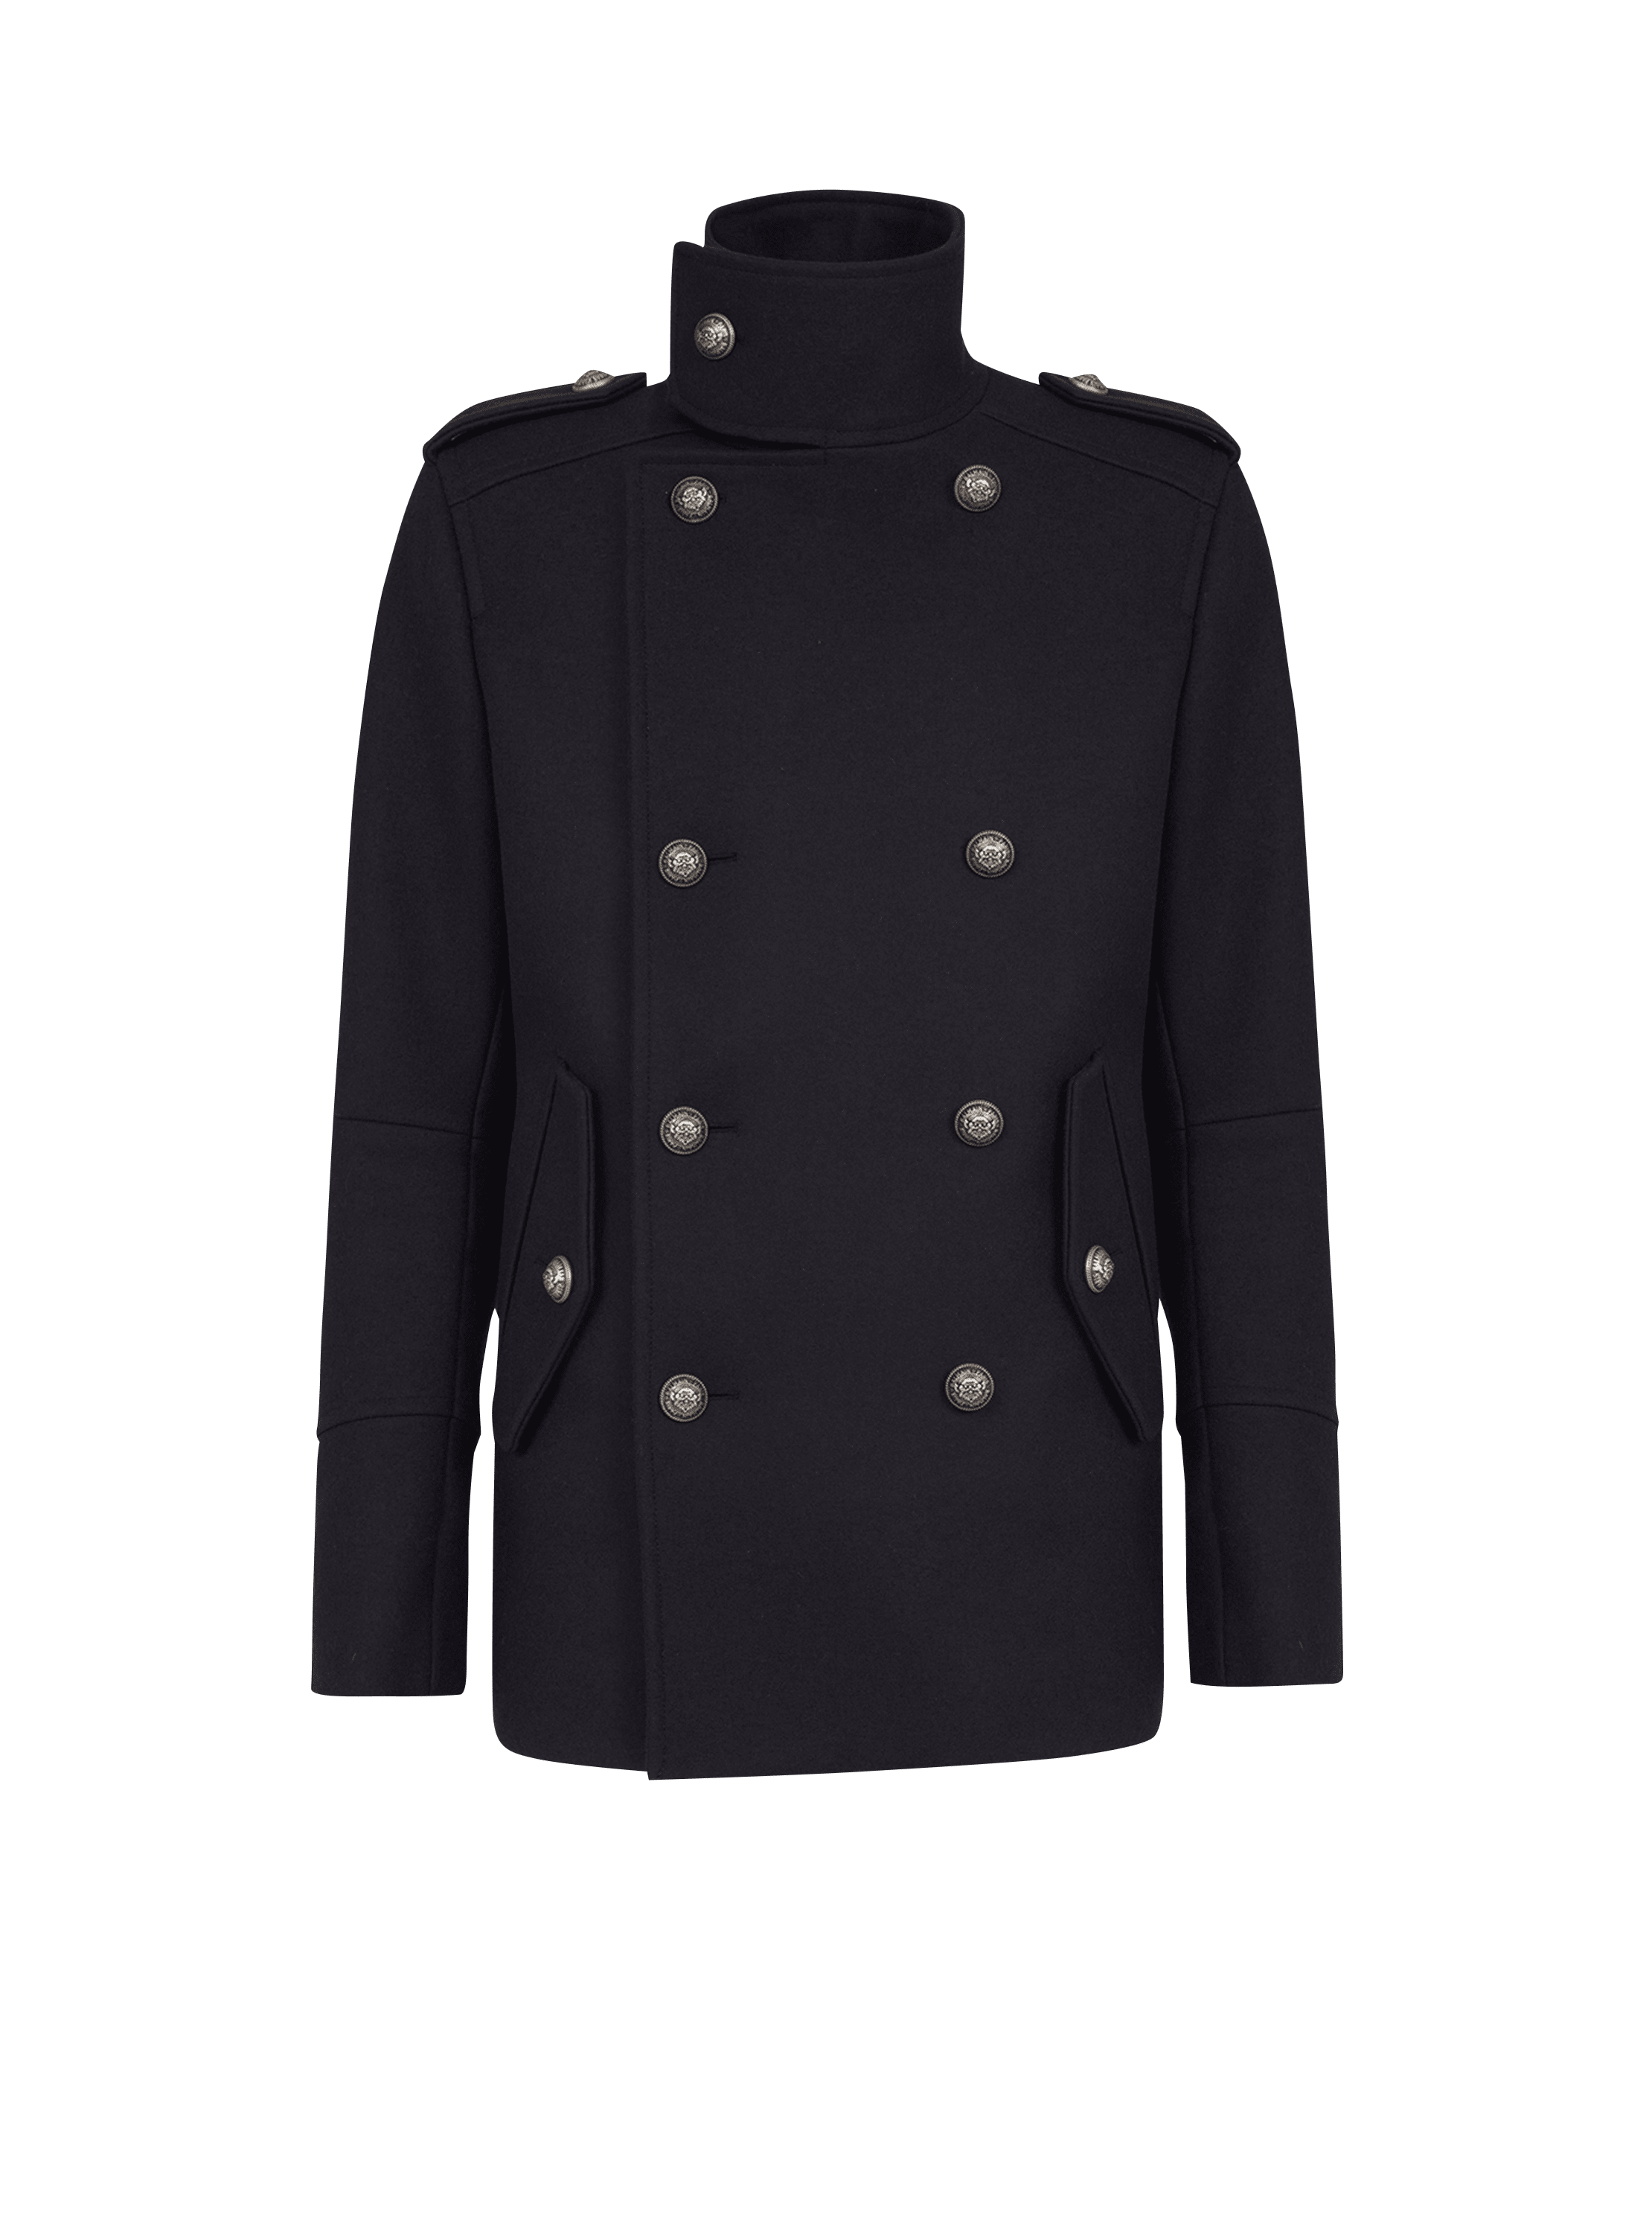 Wool military pea coat with double-breasted silver-tone | BALMAIN